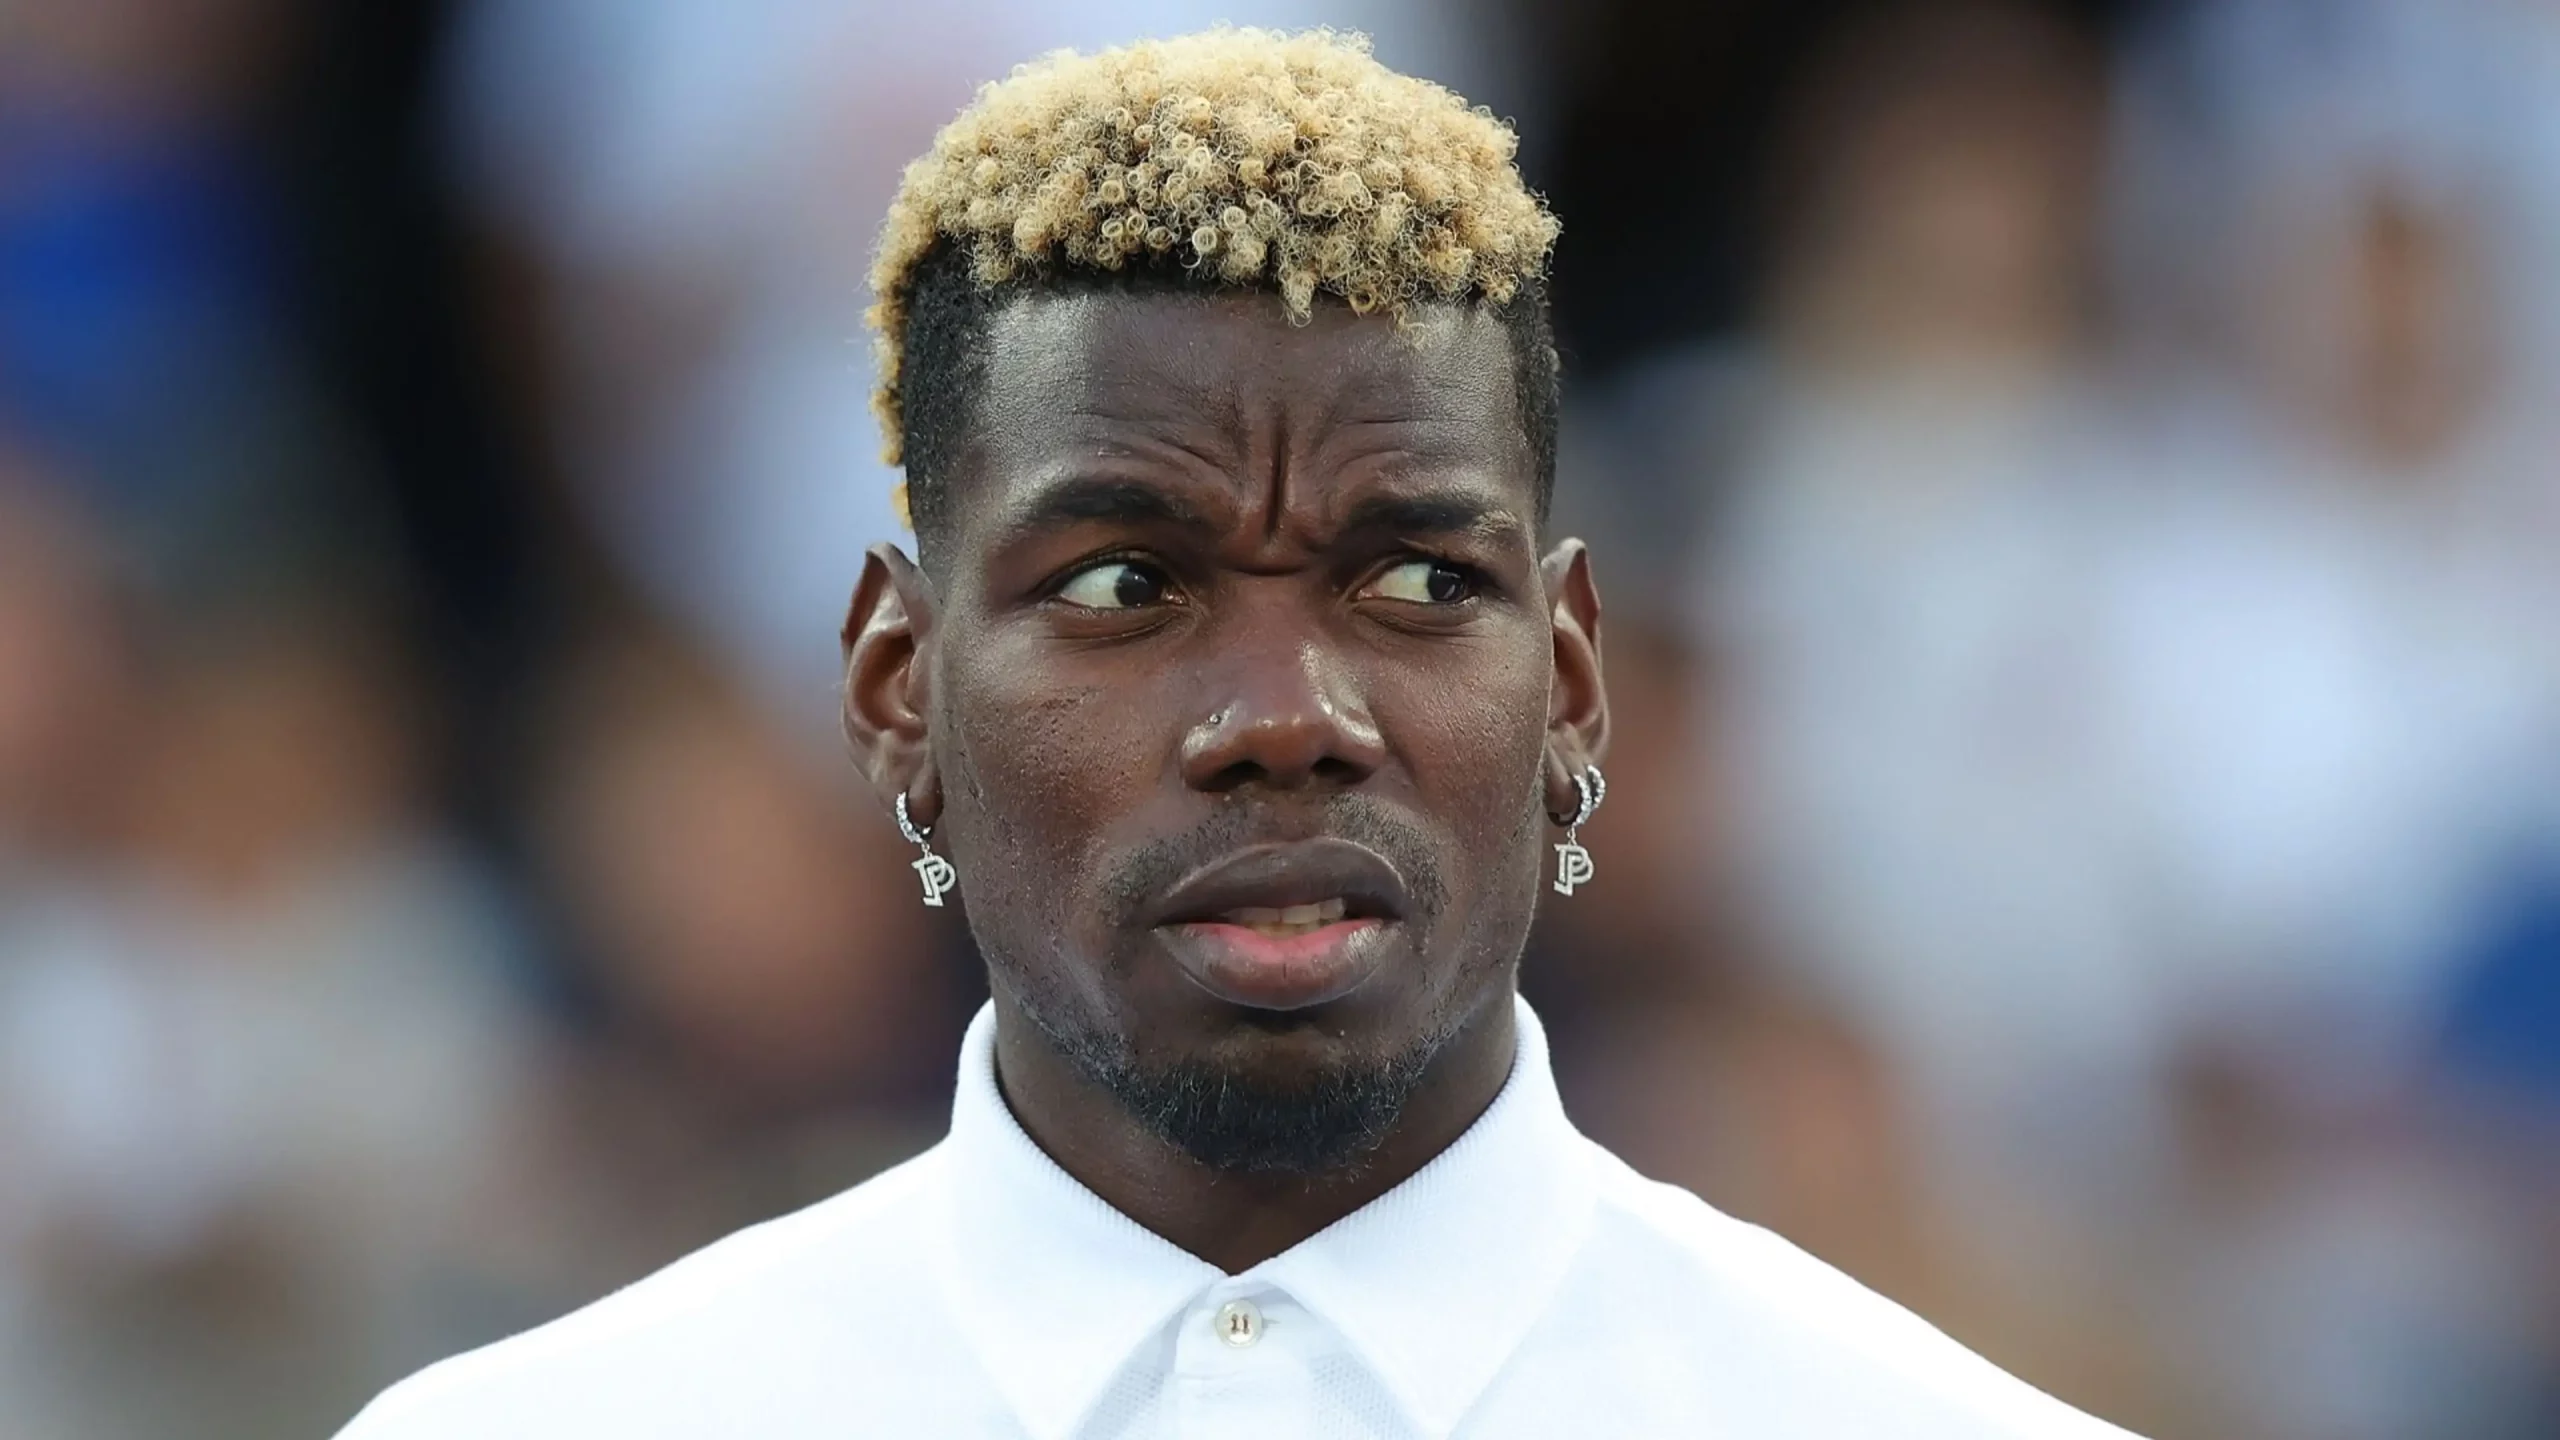 Doping: Pogba risks four-year ban after second positive test